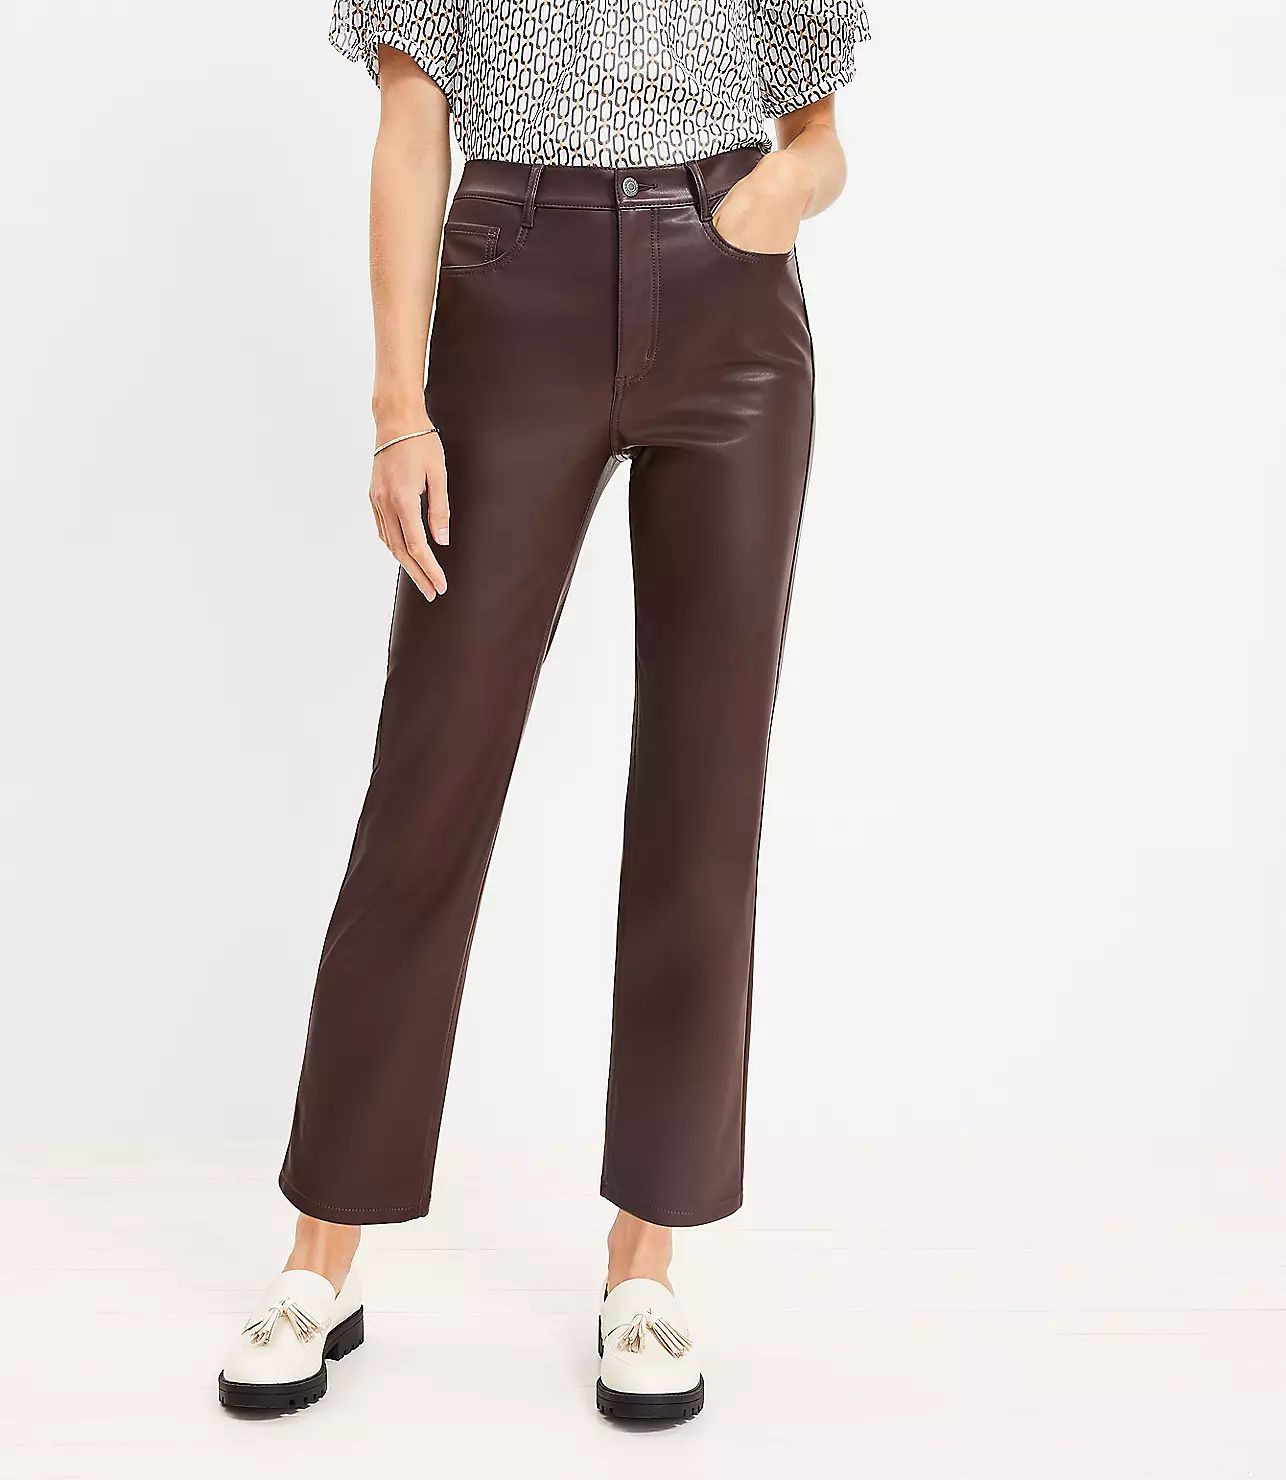 Five Pocket Straight Pants in Faux Leather | LOFT